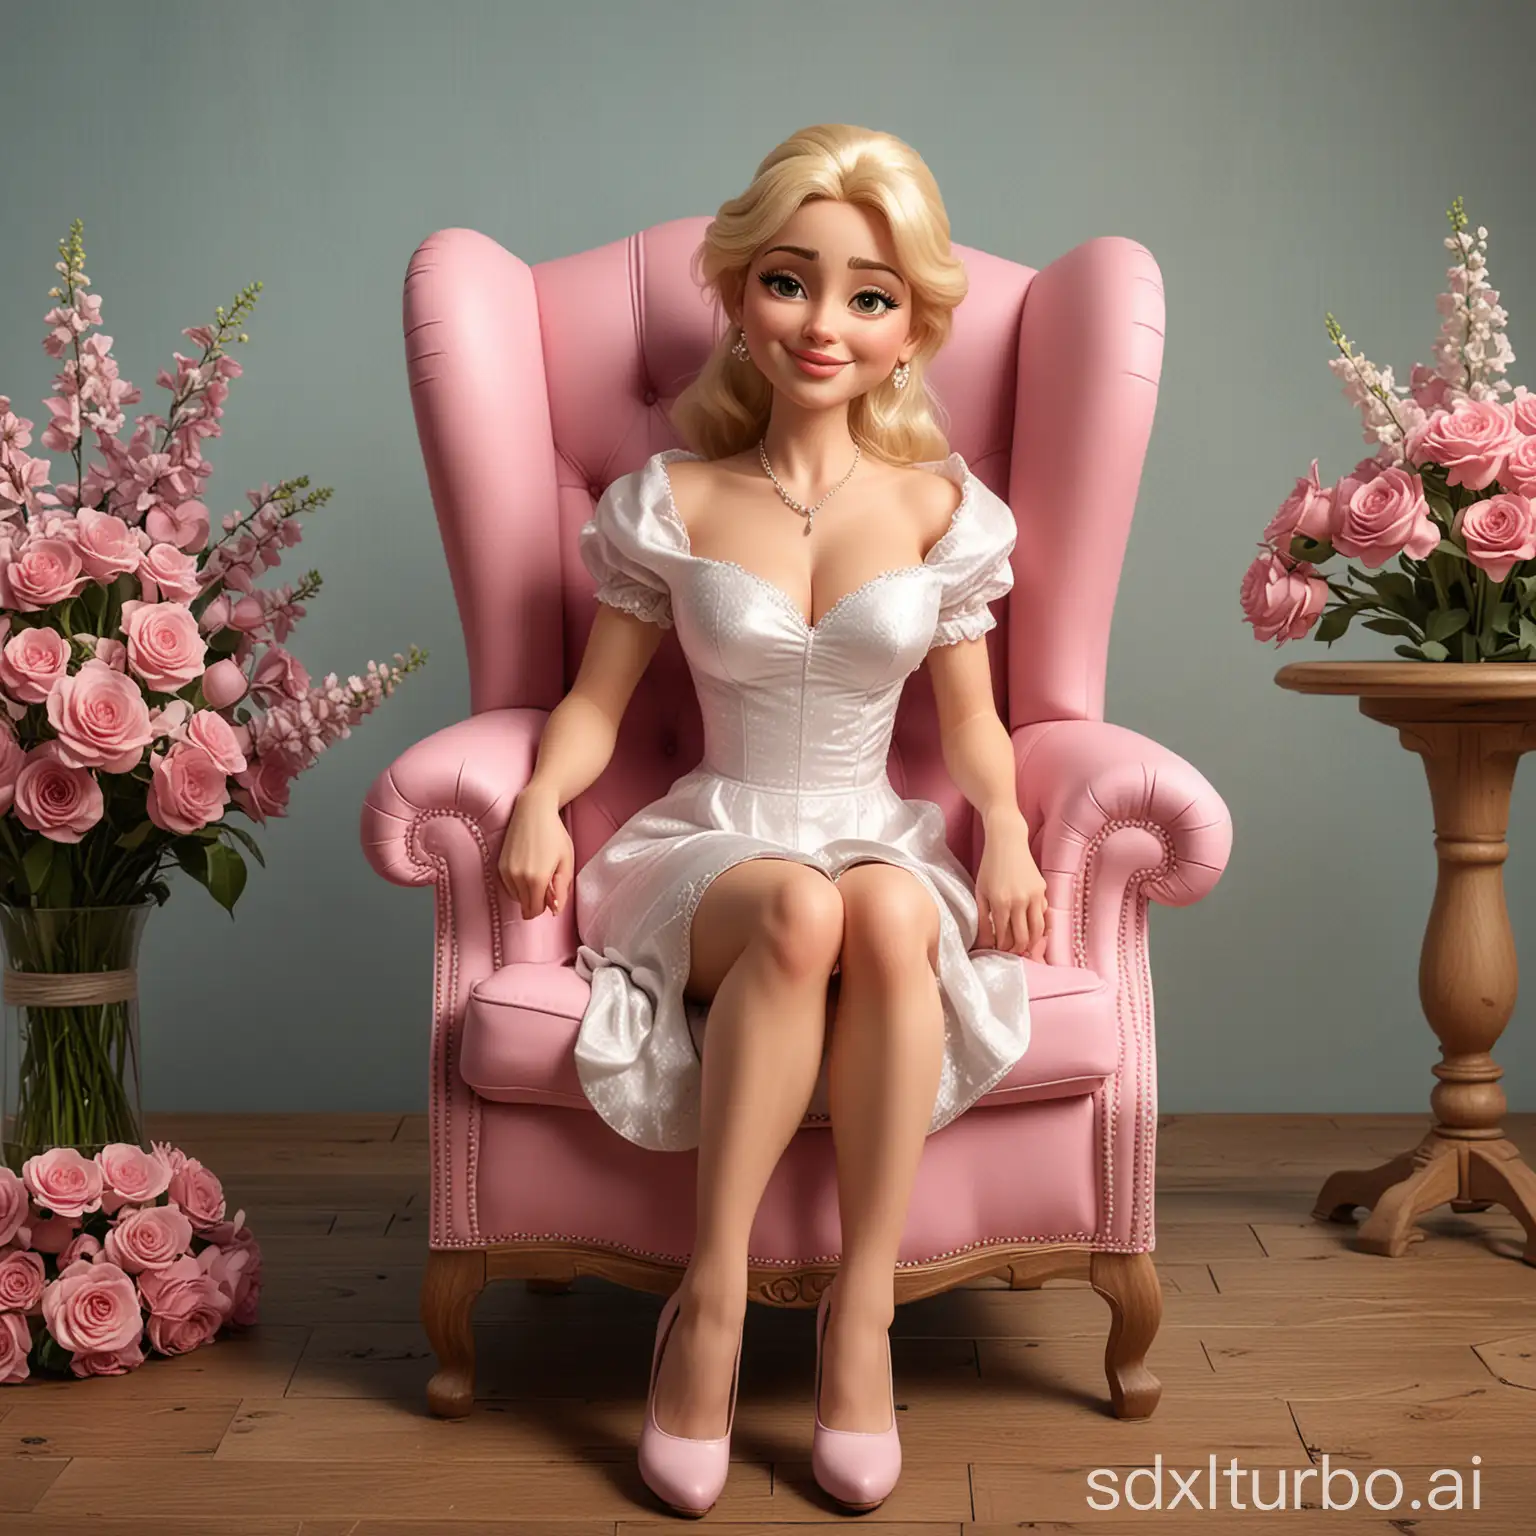 Create a Caricature 3D Realistic Disney pixar style full body with a big head. 'Madonna'. A 30 year old woman, is sitting relaxed in a classic pink color wingback wooden chair, the wood texture is clear. Wearing a Madonna wedding dress in 1985. Sit with your legs crossed, right hand holds a bouquet of flowers, your left hand placed on the edge of the chair. The background should contrast with the color of the chair and clothing,enhancing the overall composition of the picture. Use soft photography lighting, dramatic overhead lighting, very high image quality, clear character details, UHD, 16k.